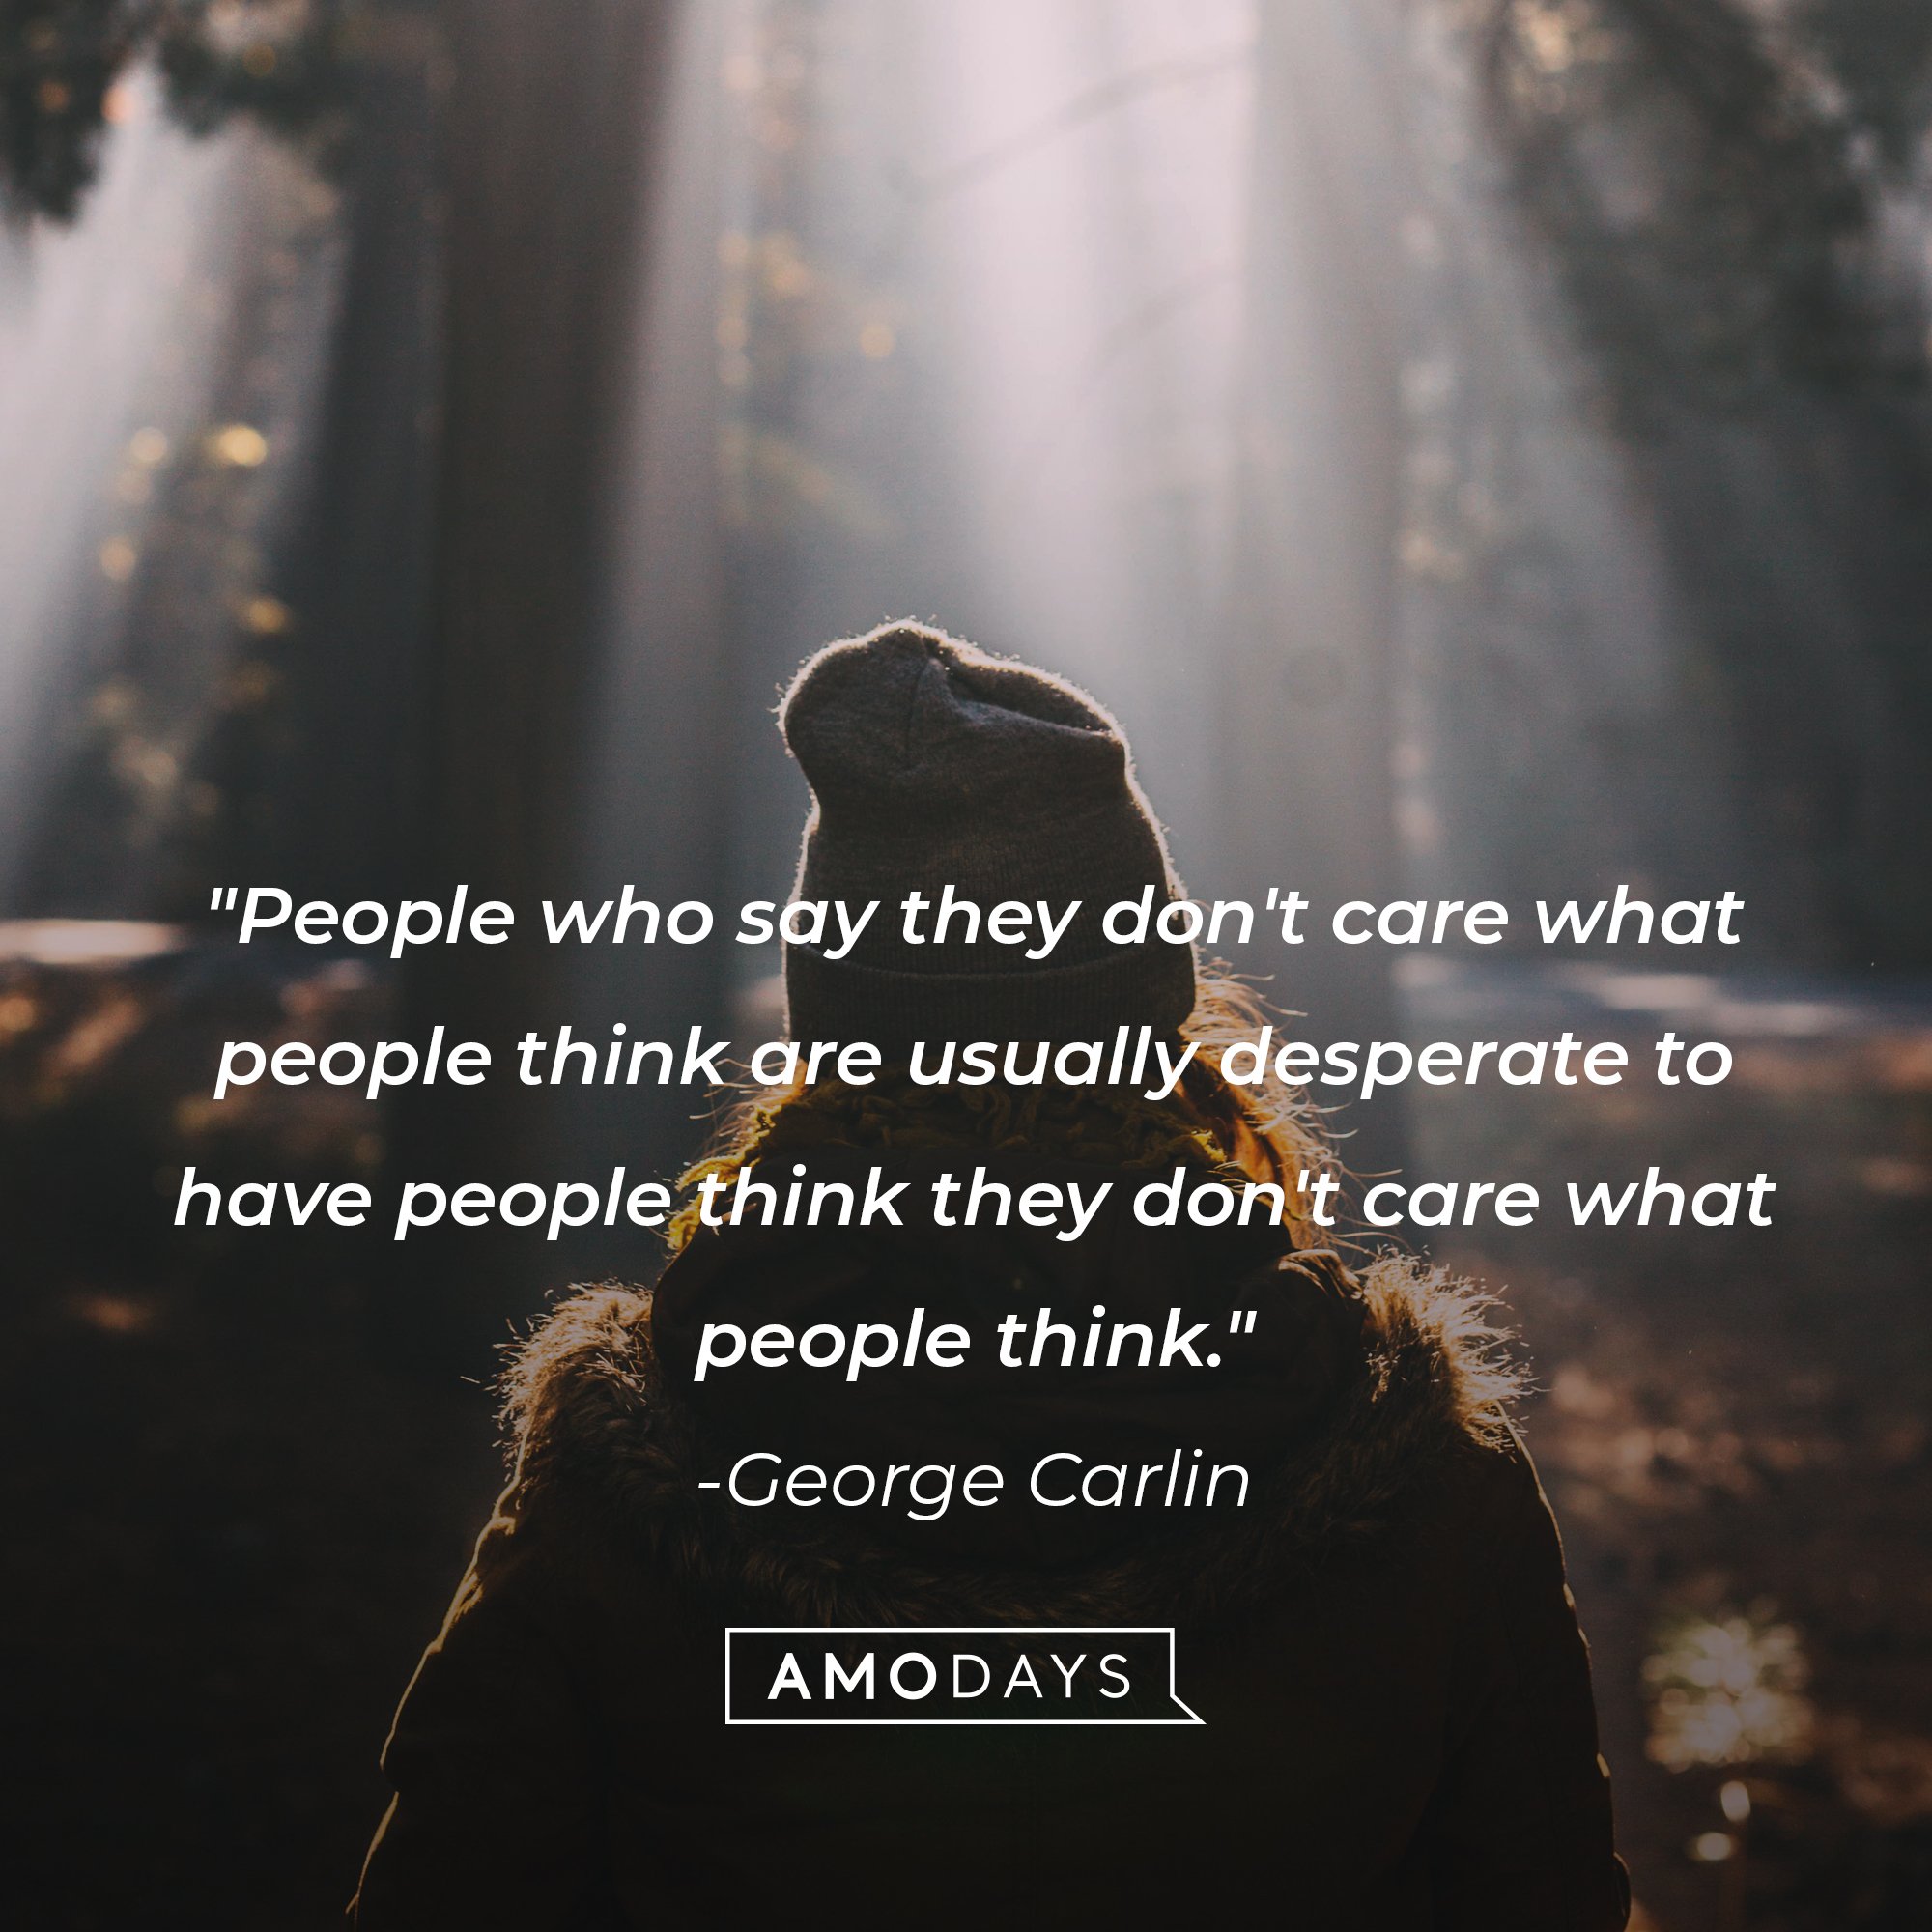 George Carlin's quote: "People who say they don't care what people think are usually desperate to have people think they don't care what people think." | Image: AmoDays